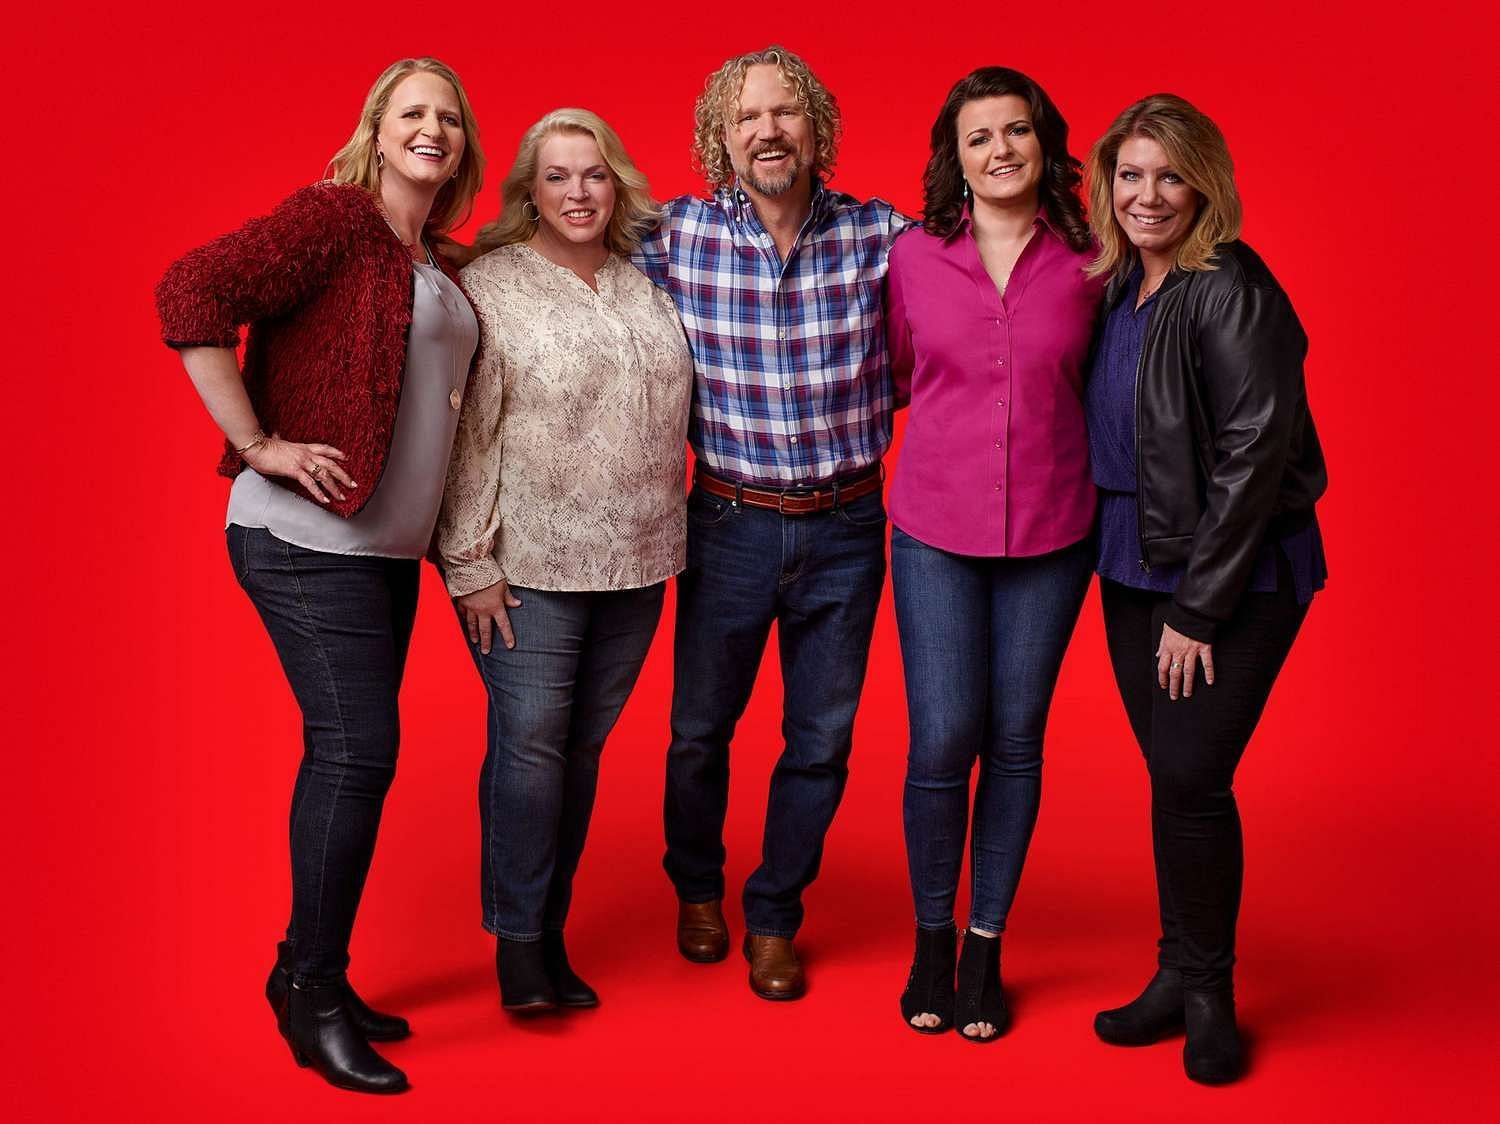 The Sister Wives family (Image via TLC)